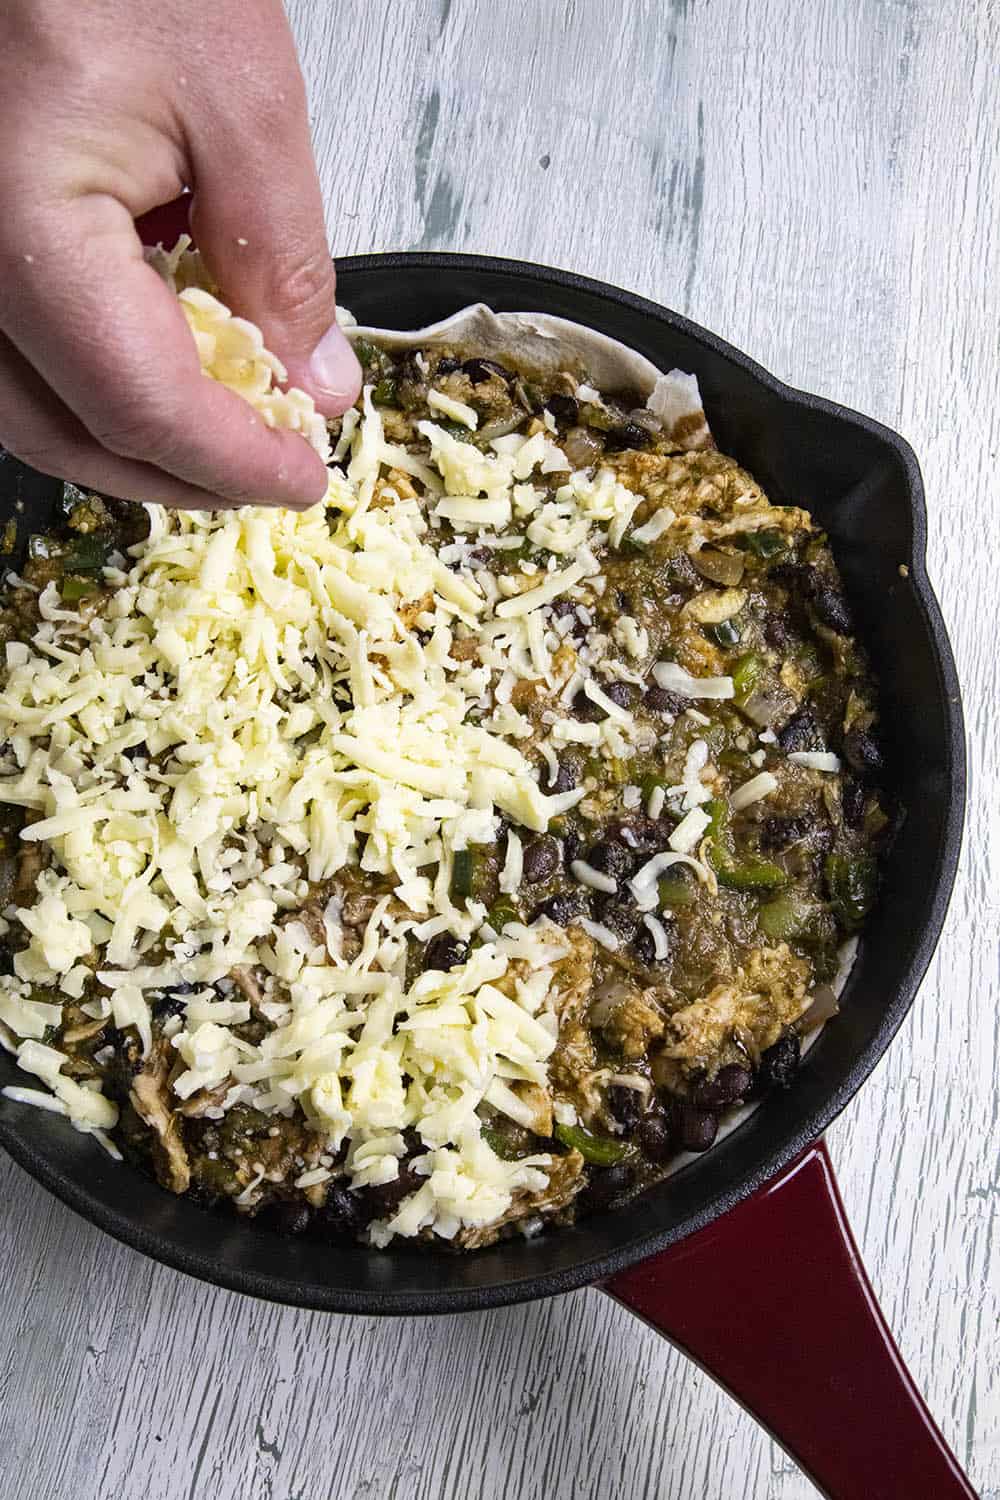 Top the casserole filling with shredded cheese